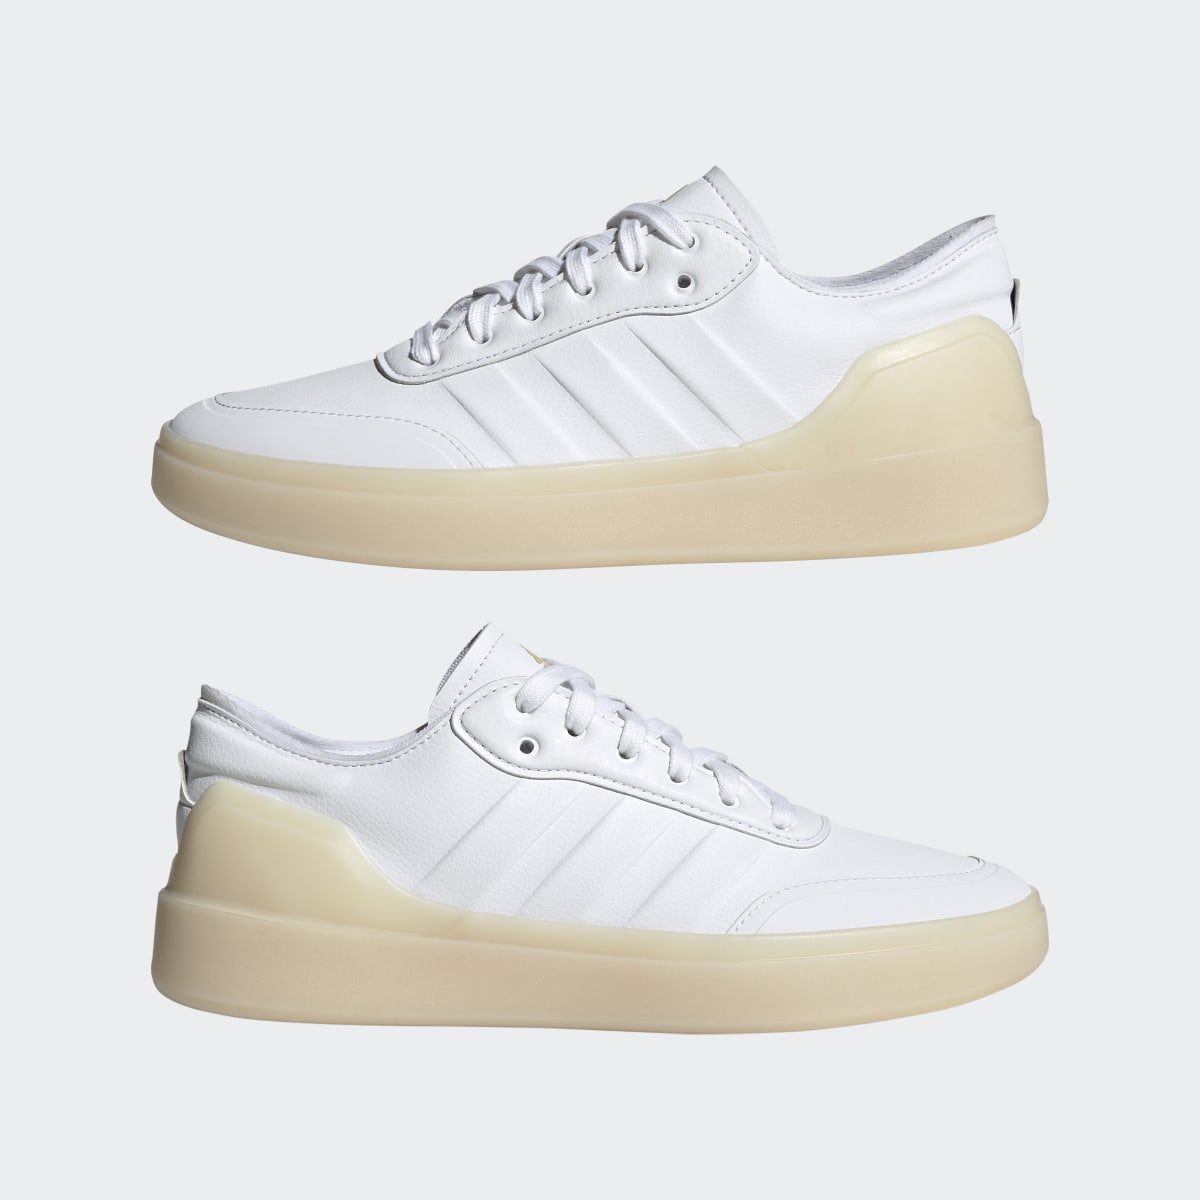 Adidas Court Revival Modern Shoes. 8